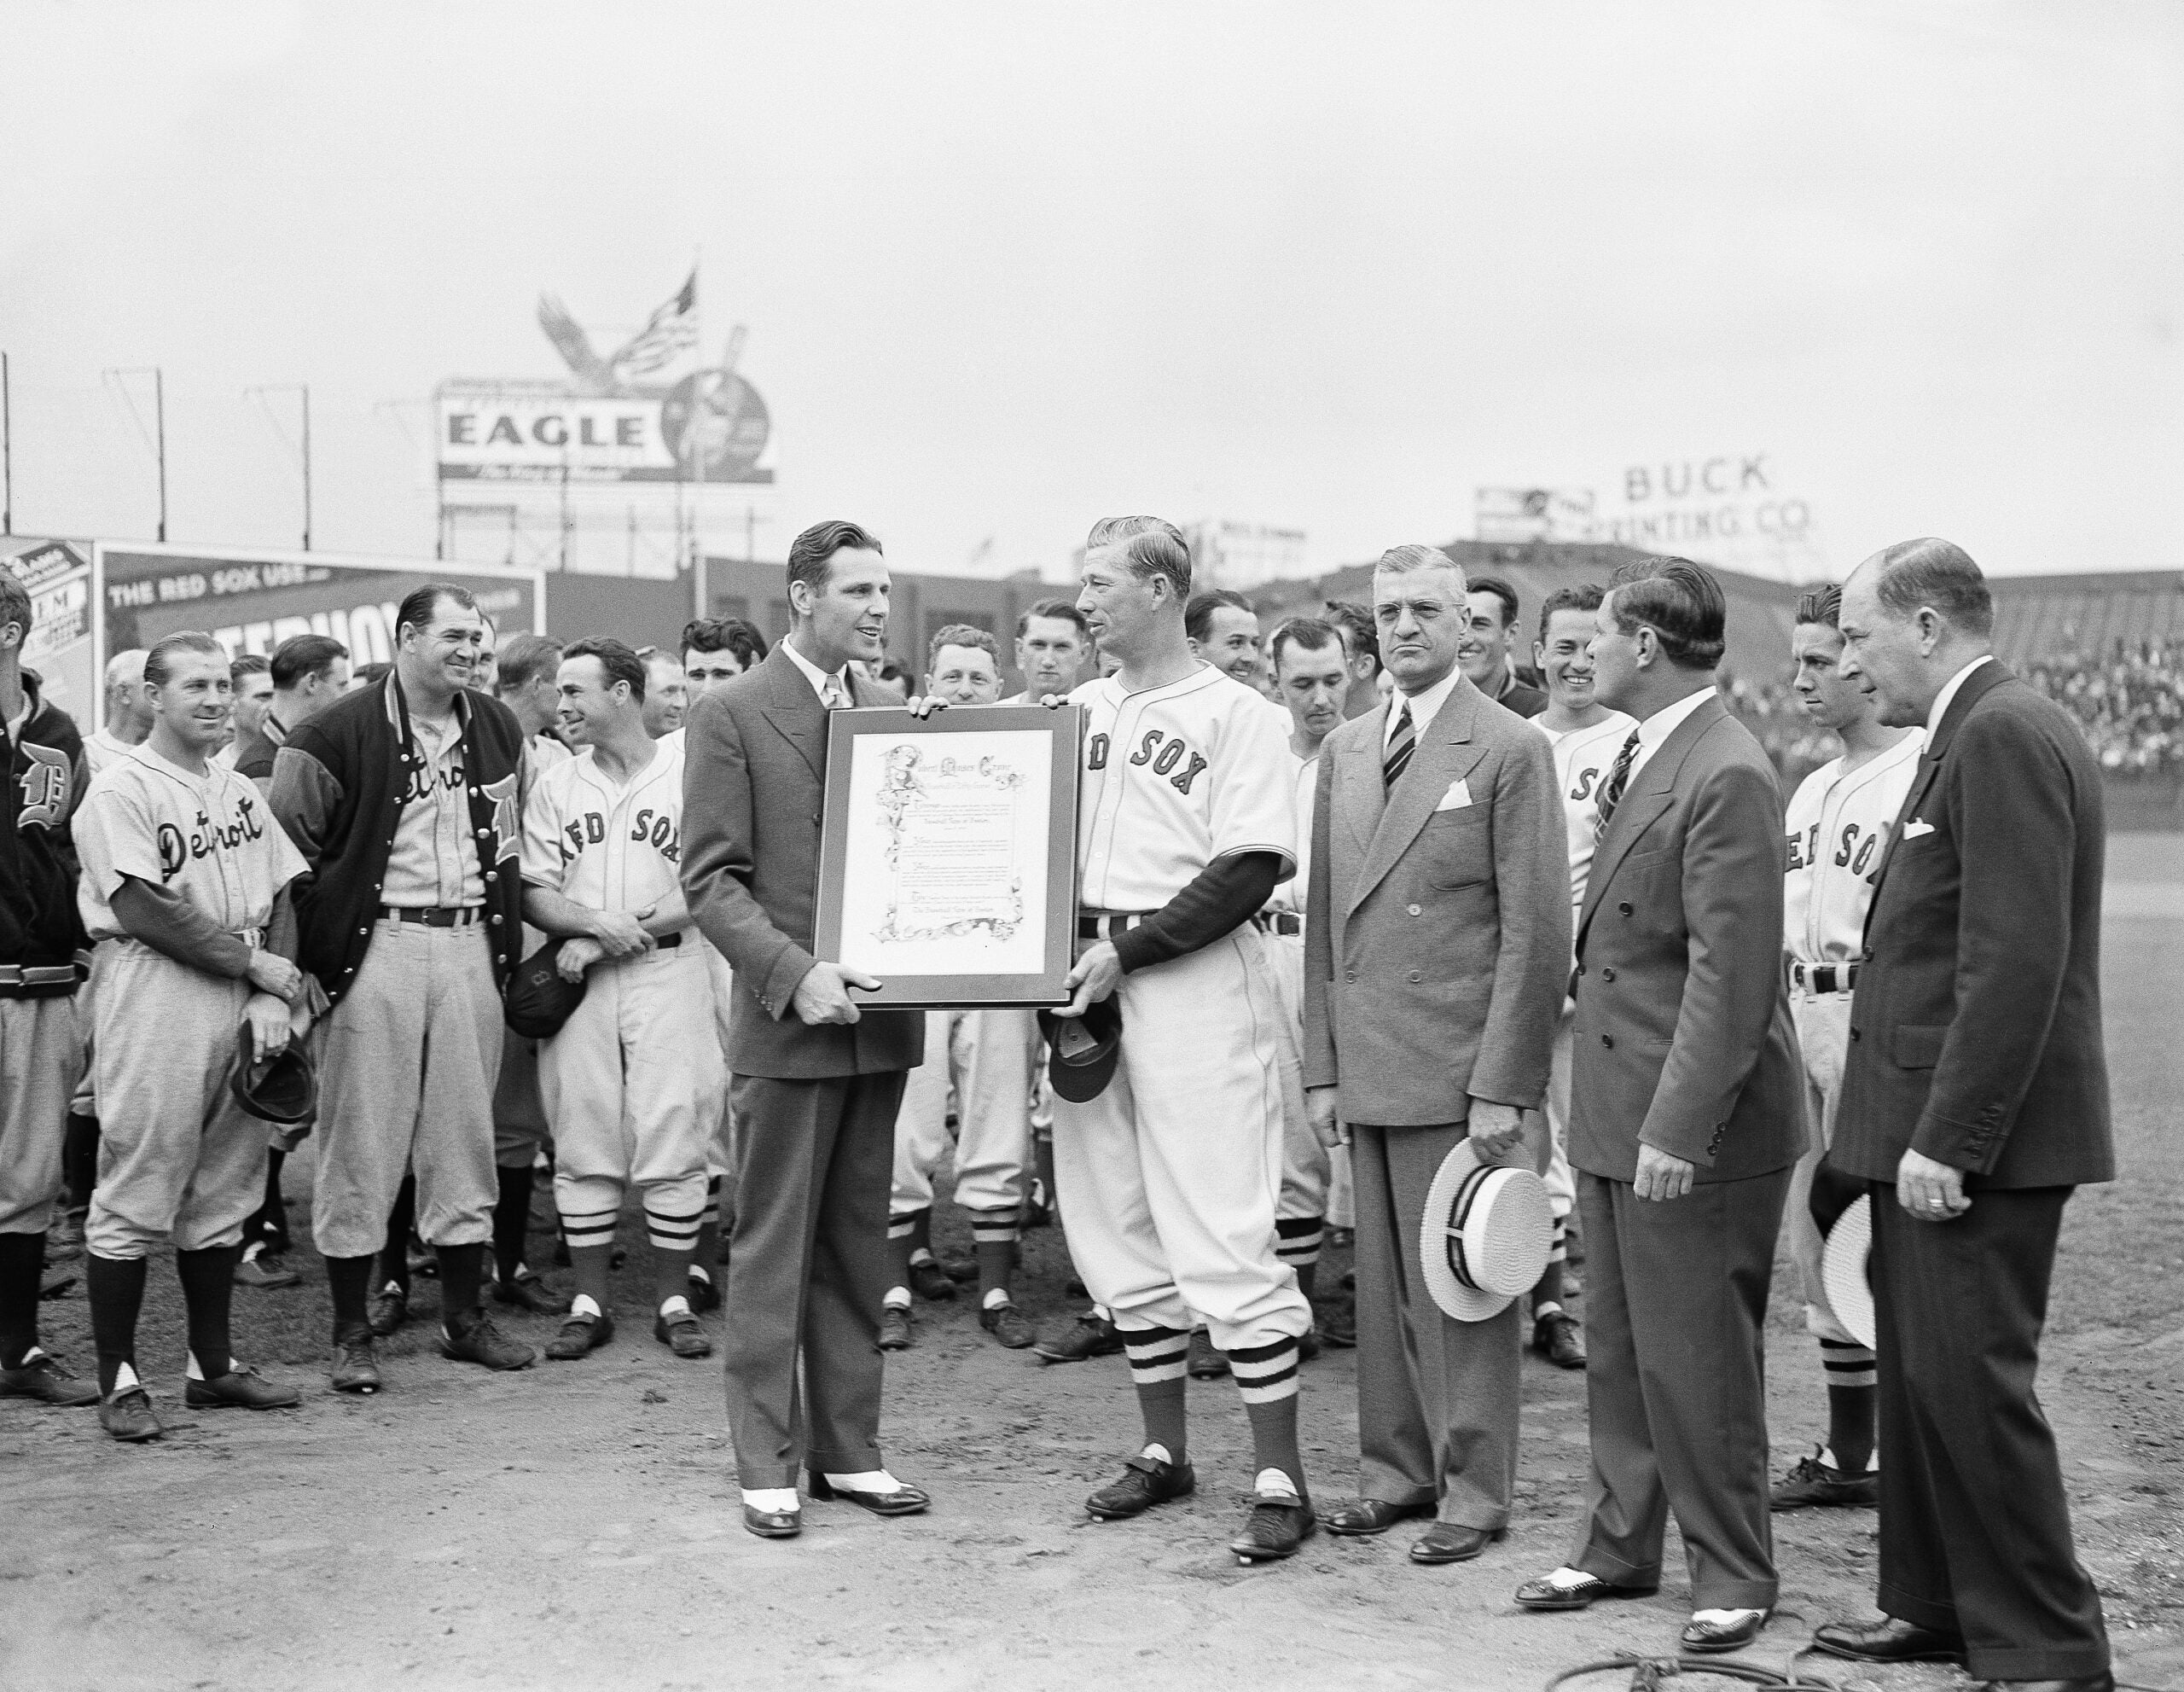 Red Sox fans honored Lefty Grove with a plaque at Fenway Park in 1940. It was presented to the veteran pitcher by Mayor Maurice J. Tobin of Boston. Will Harridge, right, president of the American League, was on hand to add his congratulations.